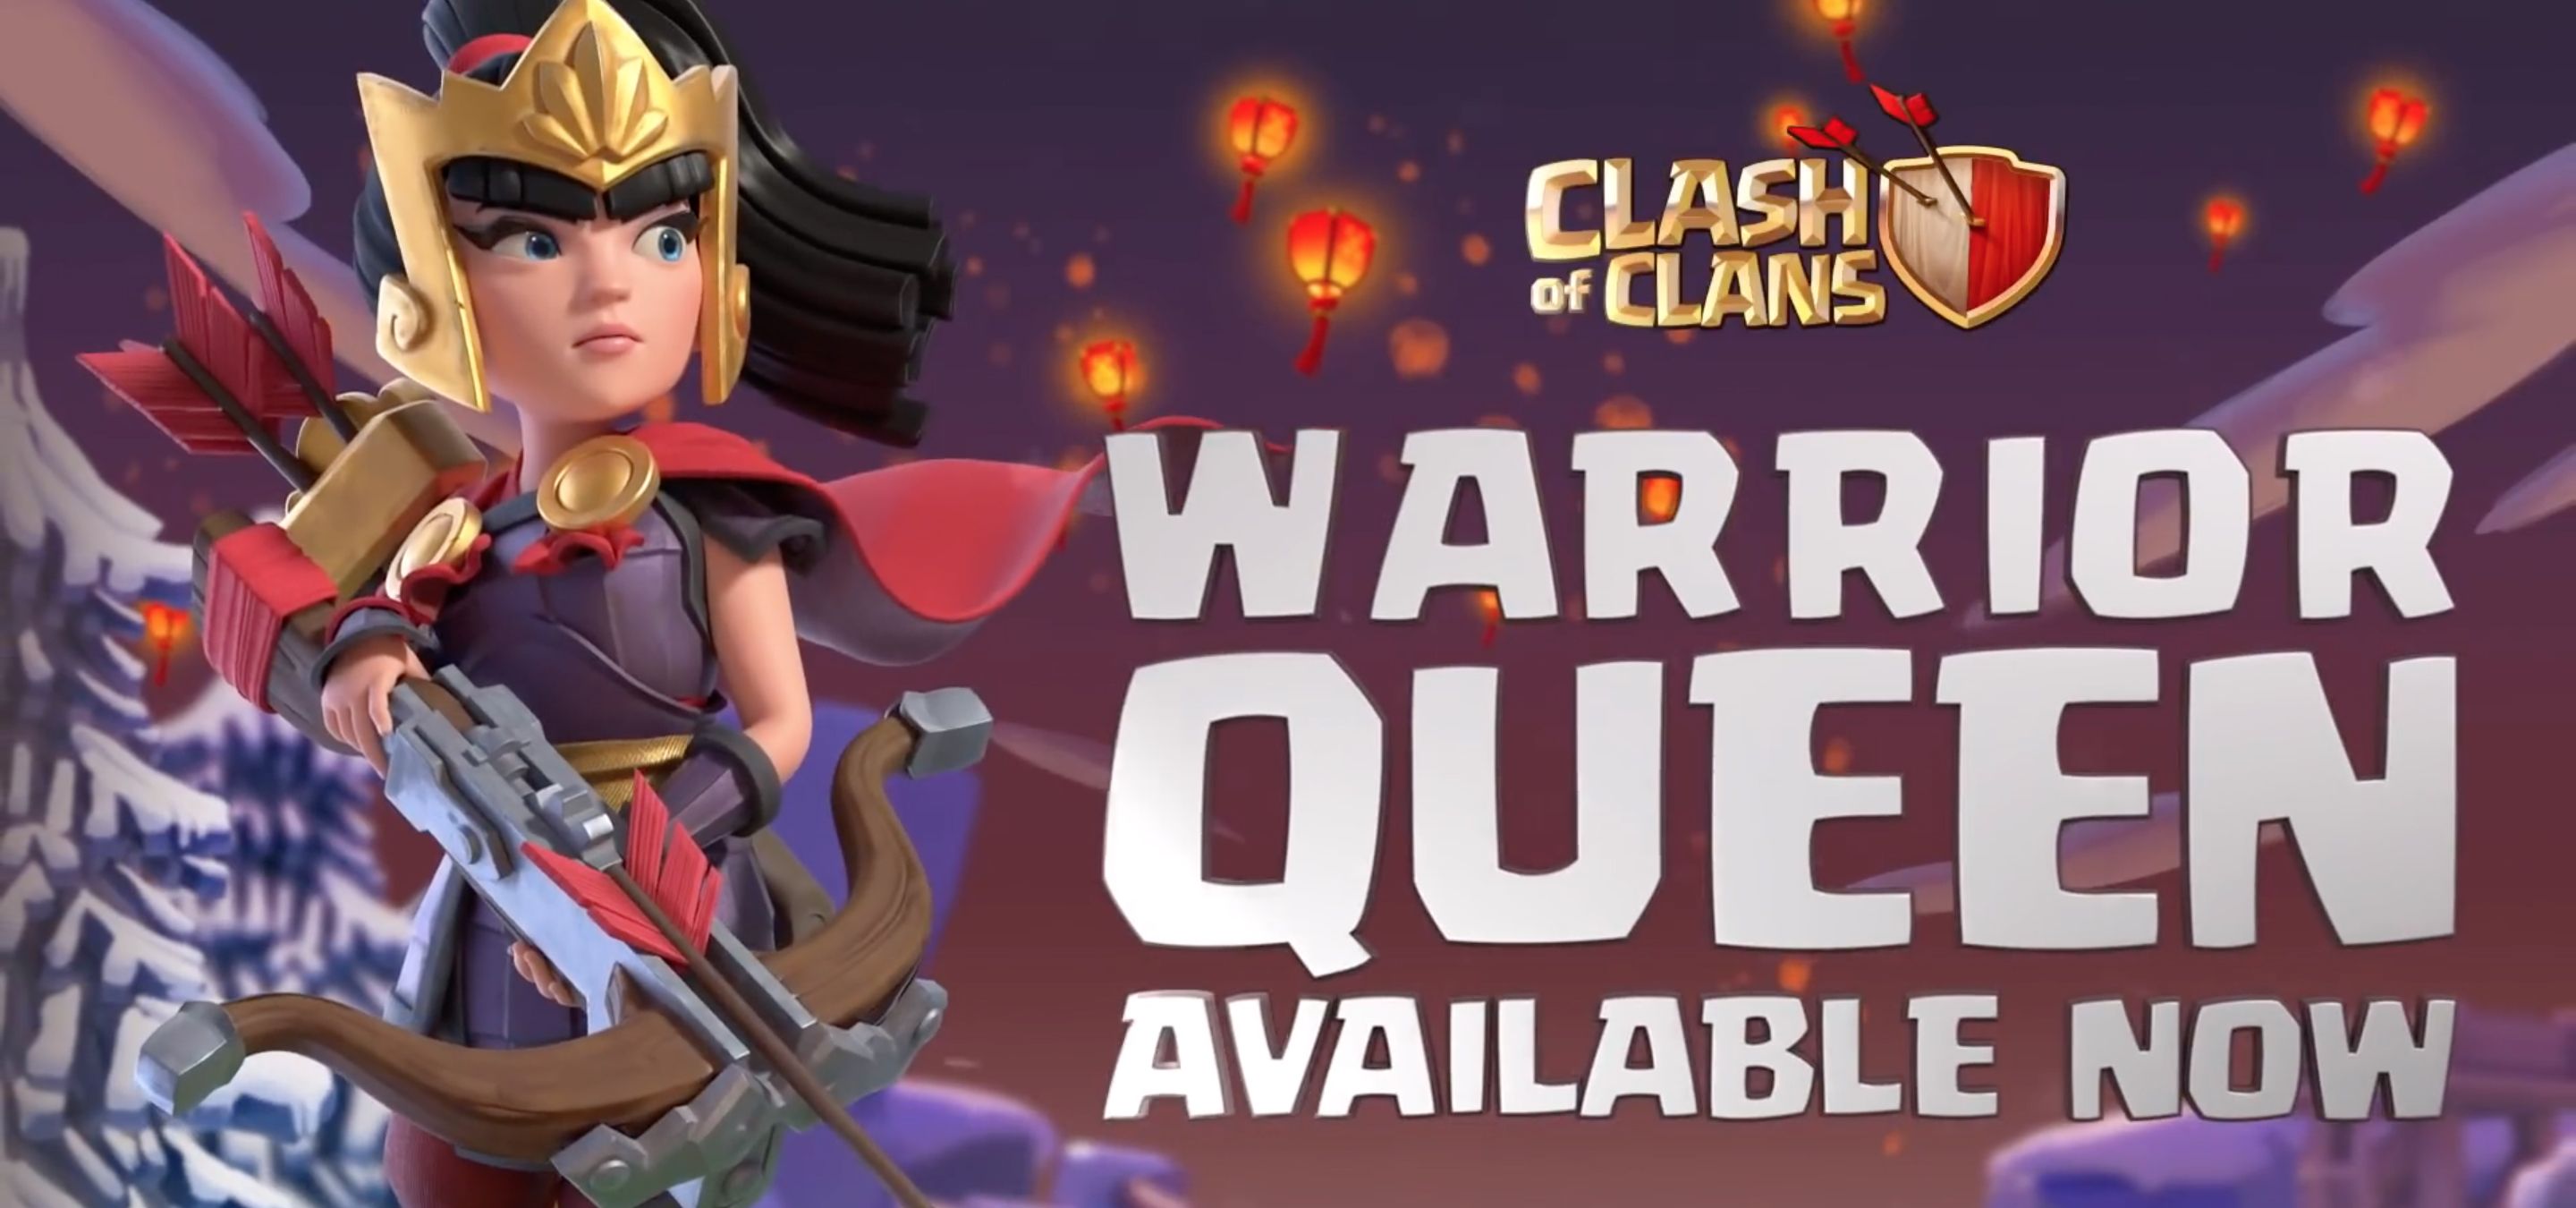 Warrior Queen Skin Now Available + Free Skin Giveaway!. House of Clashers. Clash of Clans News & Strategies